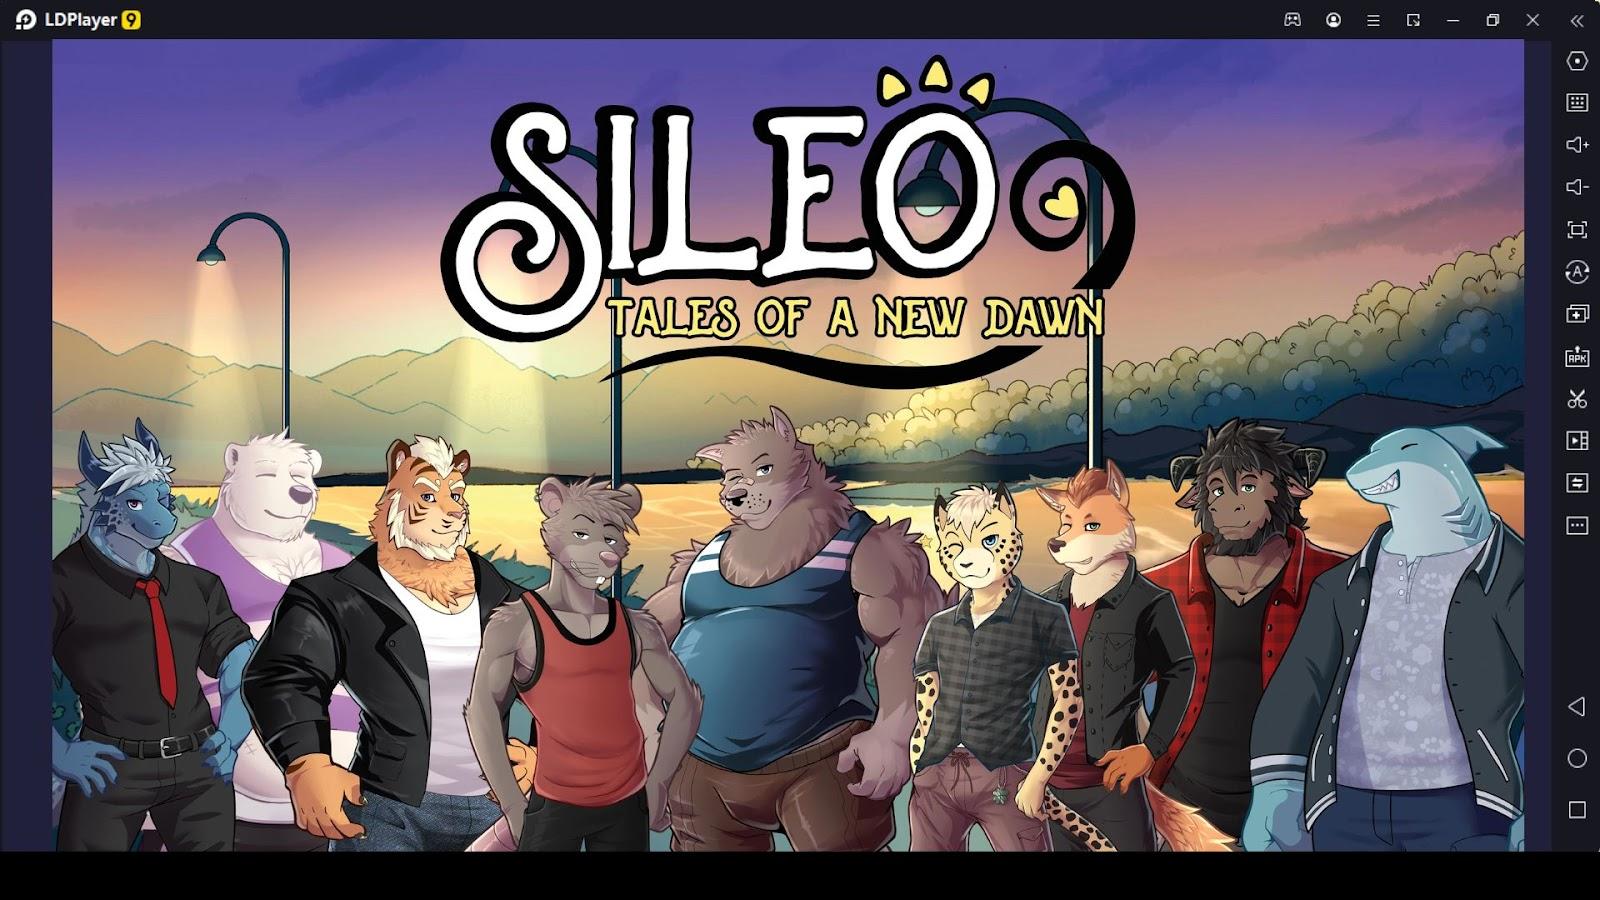 Sileo: Tales of a new dawn